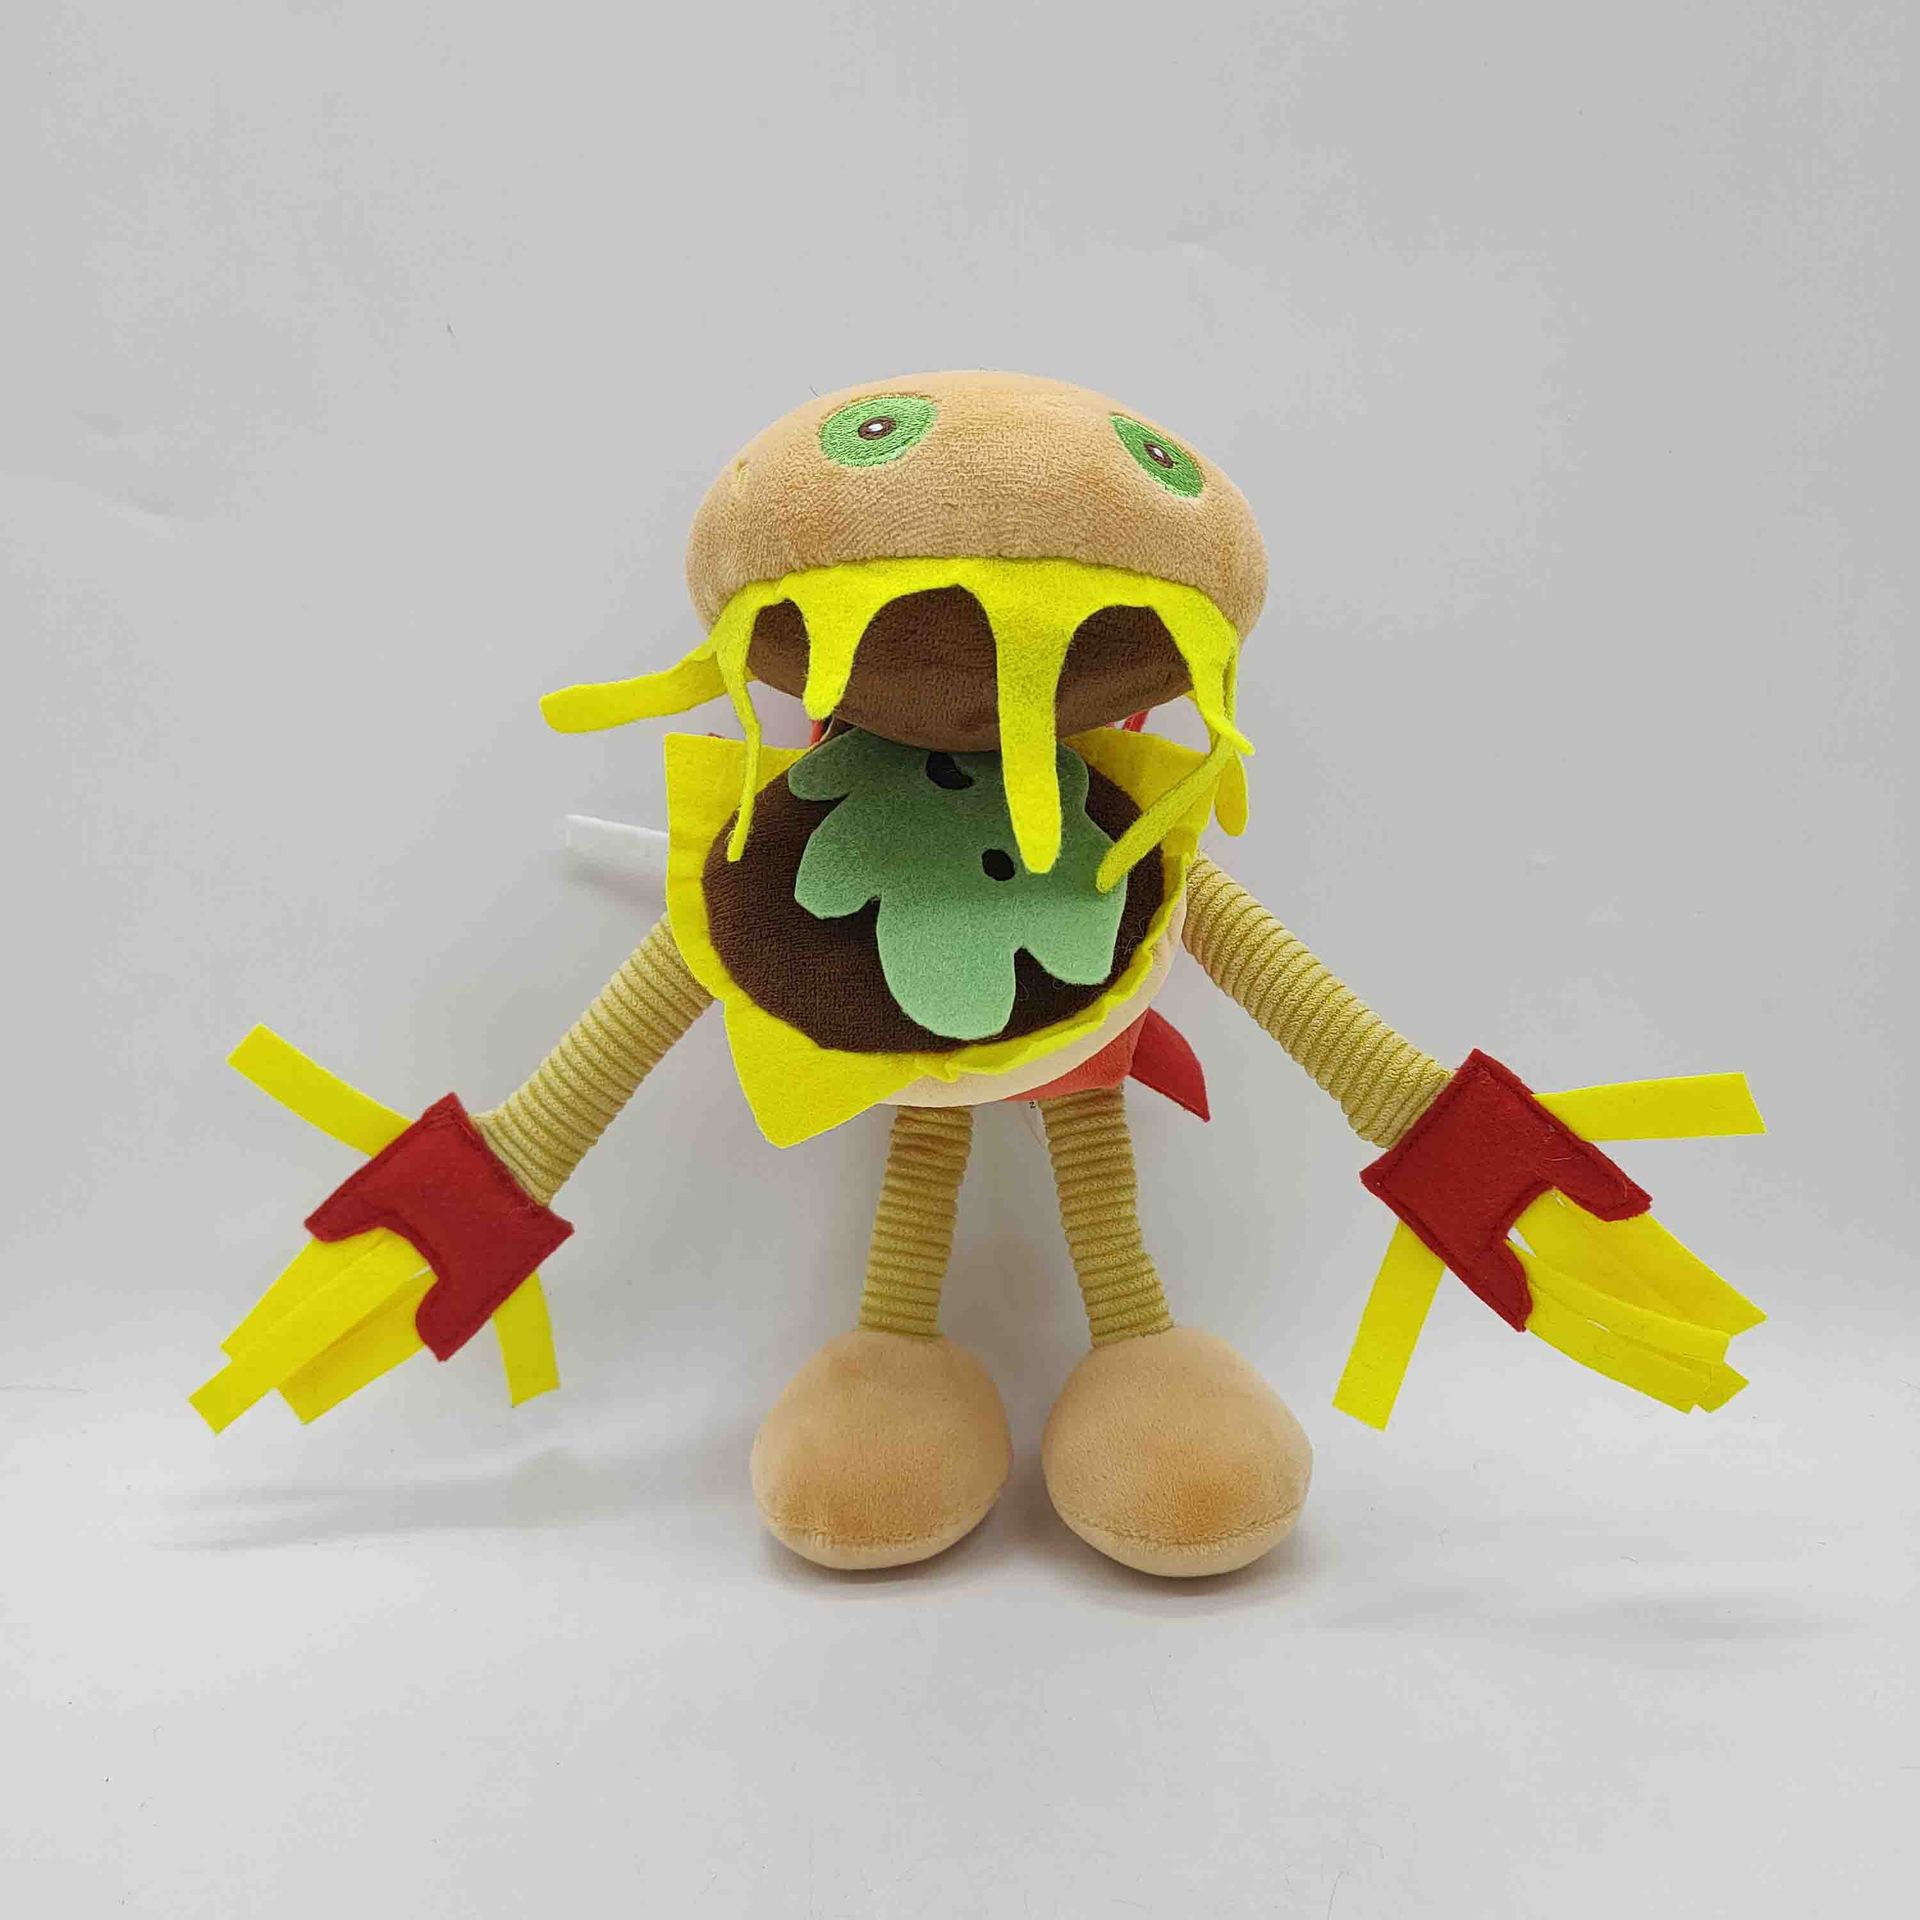 Boxy Boo Toy Hamburger Cartoon Game Peripheral Dolls Red Robot Filled Plush Dolls Holiday Gift Collection 1 - Boxy Boo Plush